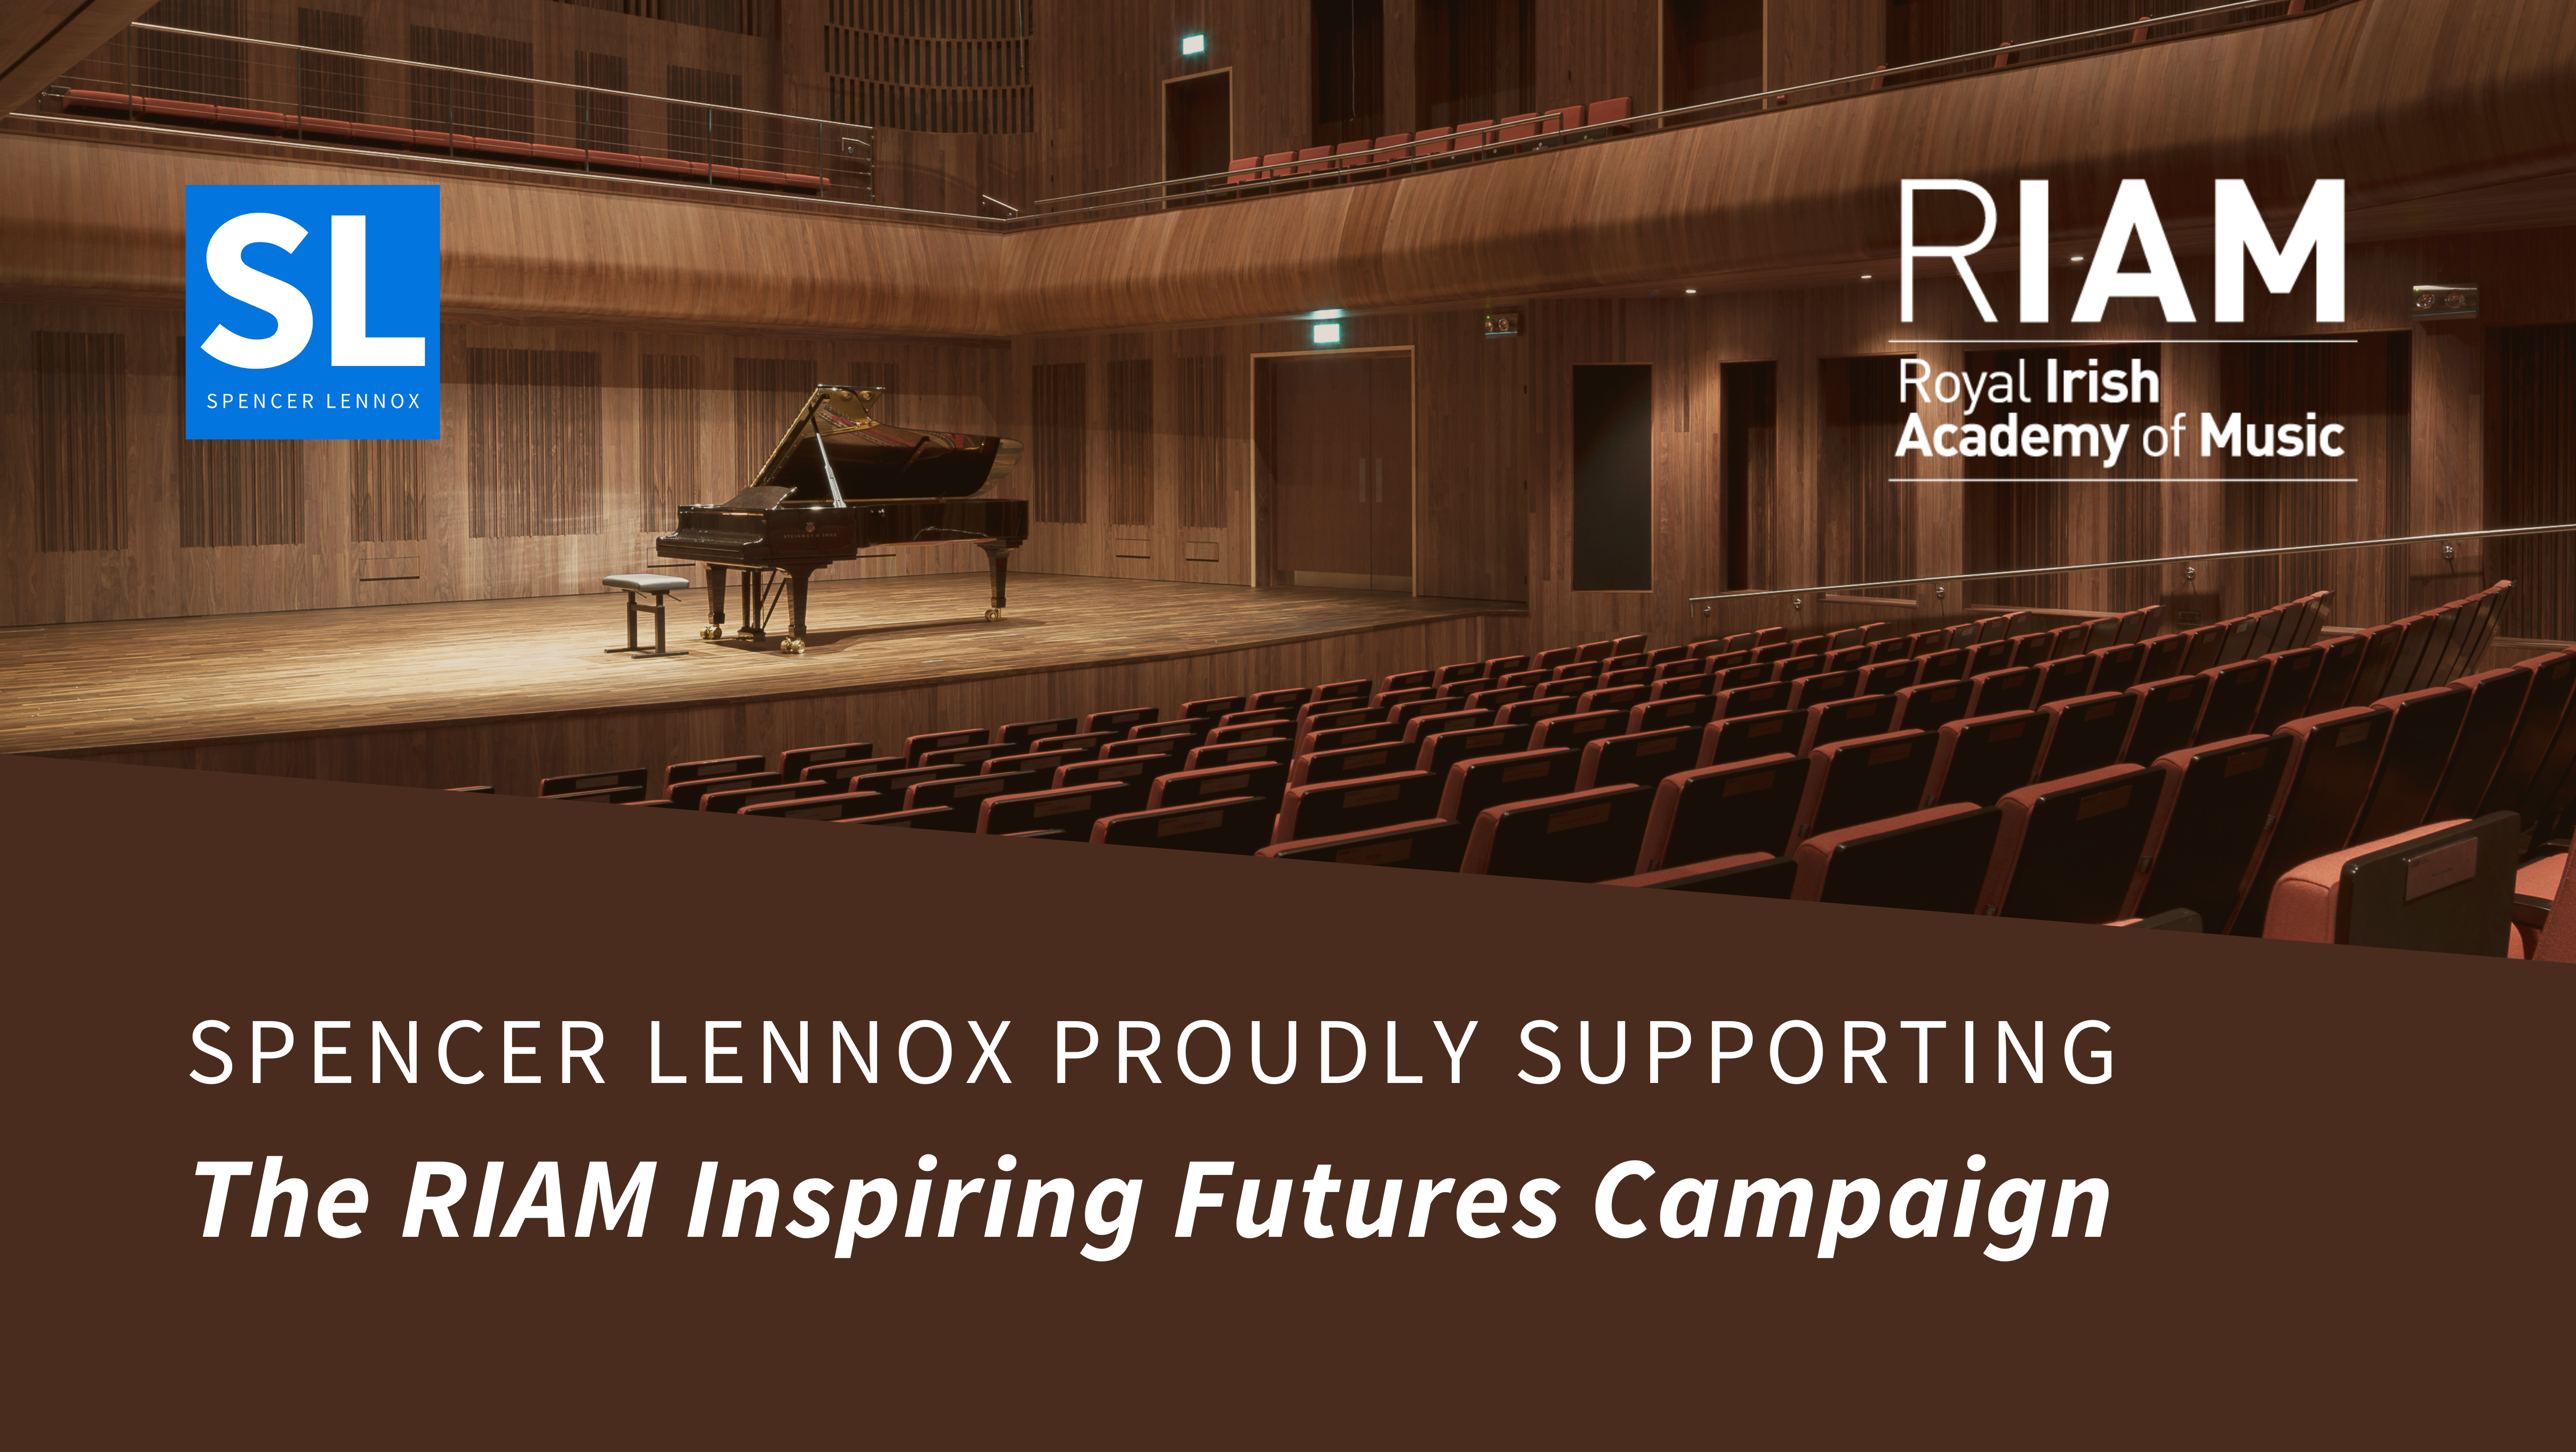 Thank you for the music! Spencer Lennox is proud to support the Royal Irish Academy of Music Inspiring Futures Campaign